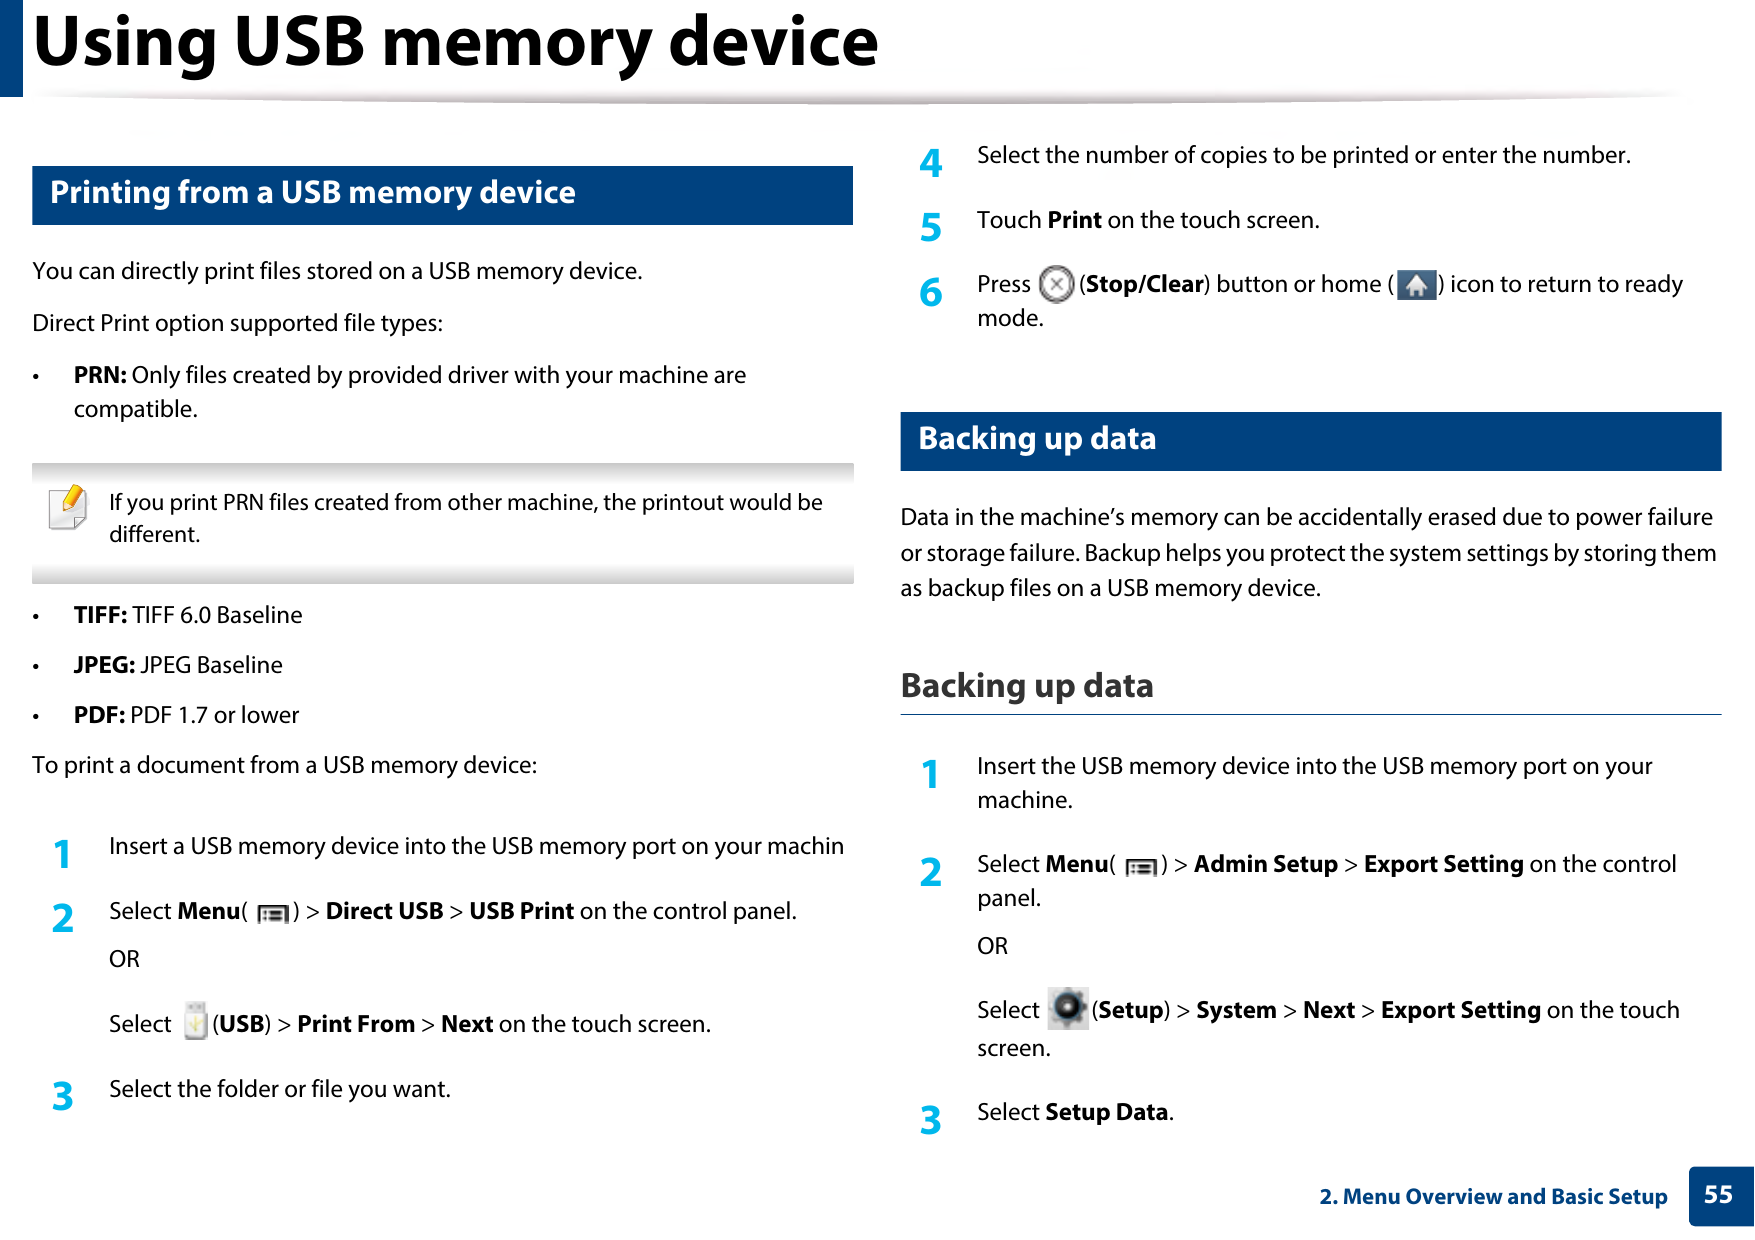 Using USB memory device552. Menu Overview and Basic Setup15 Printing from a USB memory deviceYou can directly print files stored on a USB memory device.Direct Print option supported file types:•PRN: Only files created by provided driver with your machine are compatible. If you print PRN files created from other machine, the printout would be different. •TIFF: TIFF 6.0 Baseline•JPEG: JPEG Baseline•PDF: PDF 1.7 or lowerTo print a document from a USB memory device:1Insert a USB memory device into the USB memory port on your machin2  Select Menu() &gt; Direct USB &gt; USB Print on the control panel.ORSelect (USB) &gt; Print From &gt; Next on the touch screen.3  Select the folder or file you want. 4  Select the number of copies to be printed or enter the number.5  Touch Print on the touch screen.6  Press (Stop/Clear) button or home ( ) icon to return to ready mode.16 Backing up data Data in the machine’s memory can be accidentally erased due to power failure or storage failure. Backup helps you protect the system settings by storing them as backup files on a USB memory device.Backing up data1Insert the USB memory device into the USB memory port on your machine.2  Select Menu() &gt; Admin Setup &gt; Export Setting on the control panel.ORSelect (Setup) &gt; System &gt; Next &gt; Export Setting on the touch screen.3  Select Setup Data.